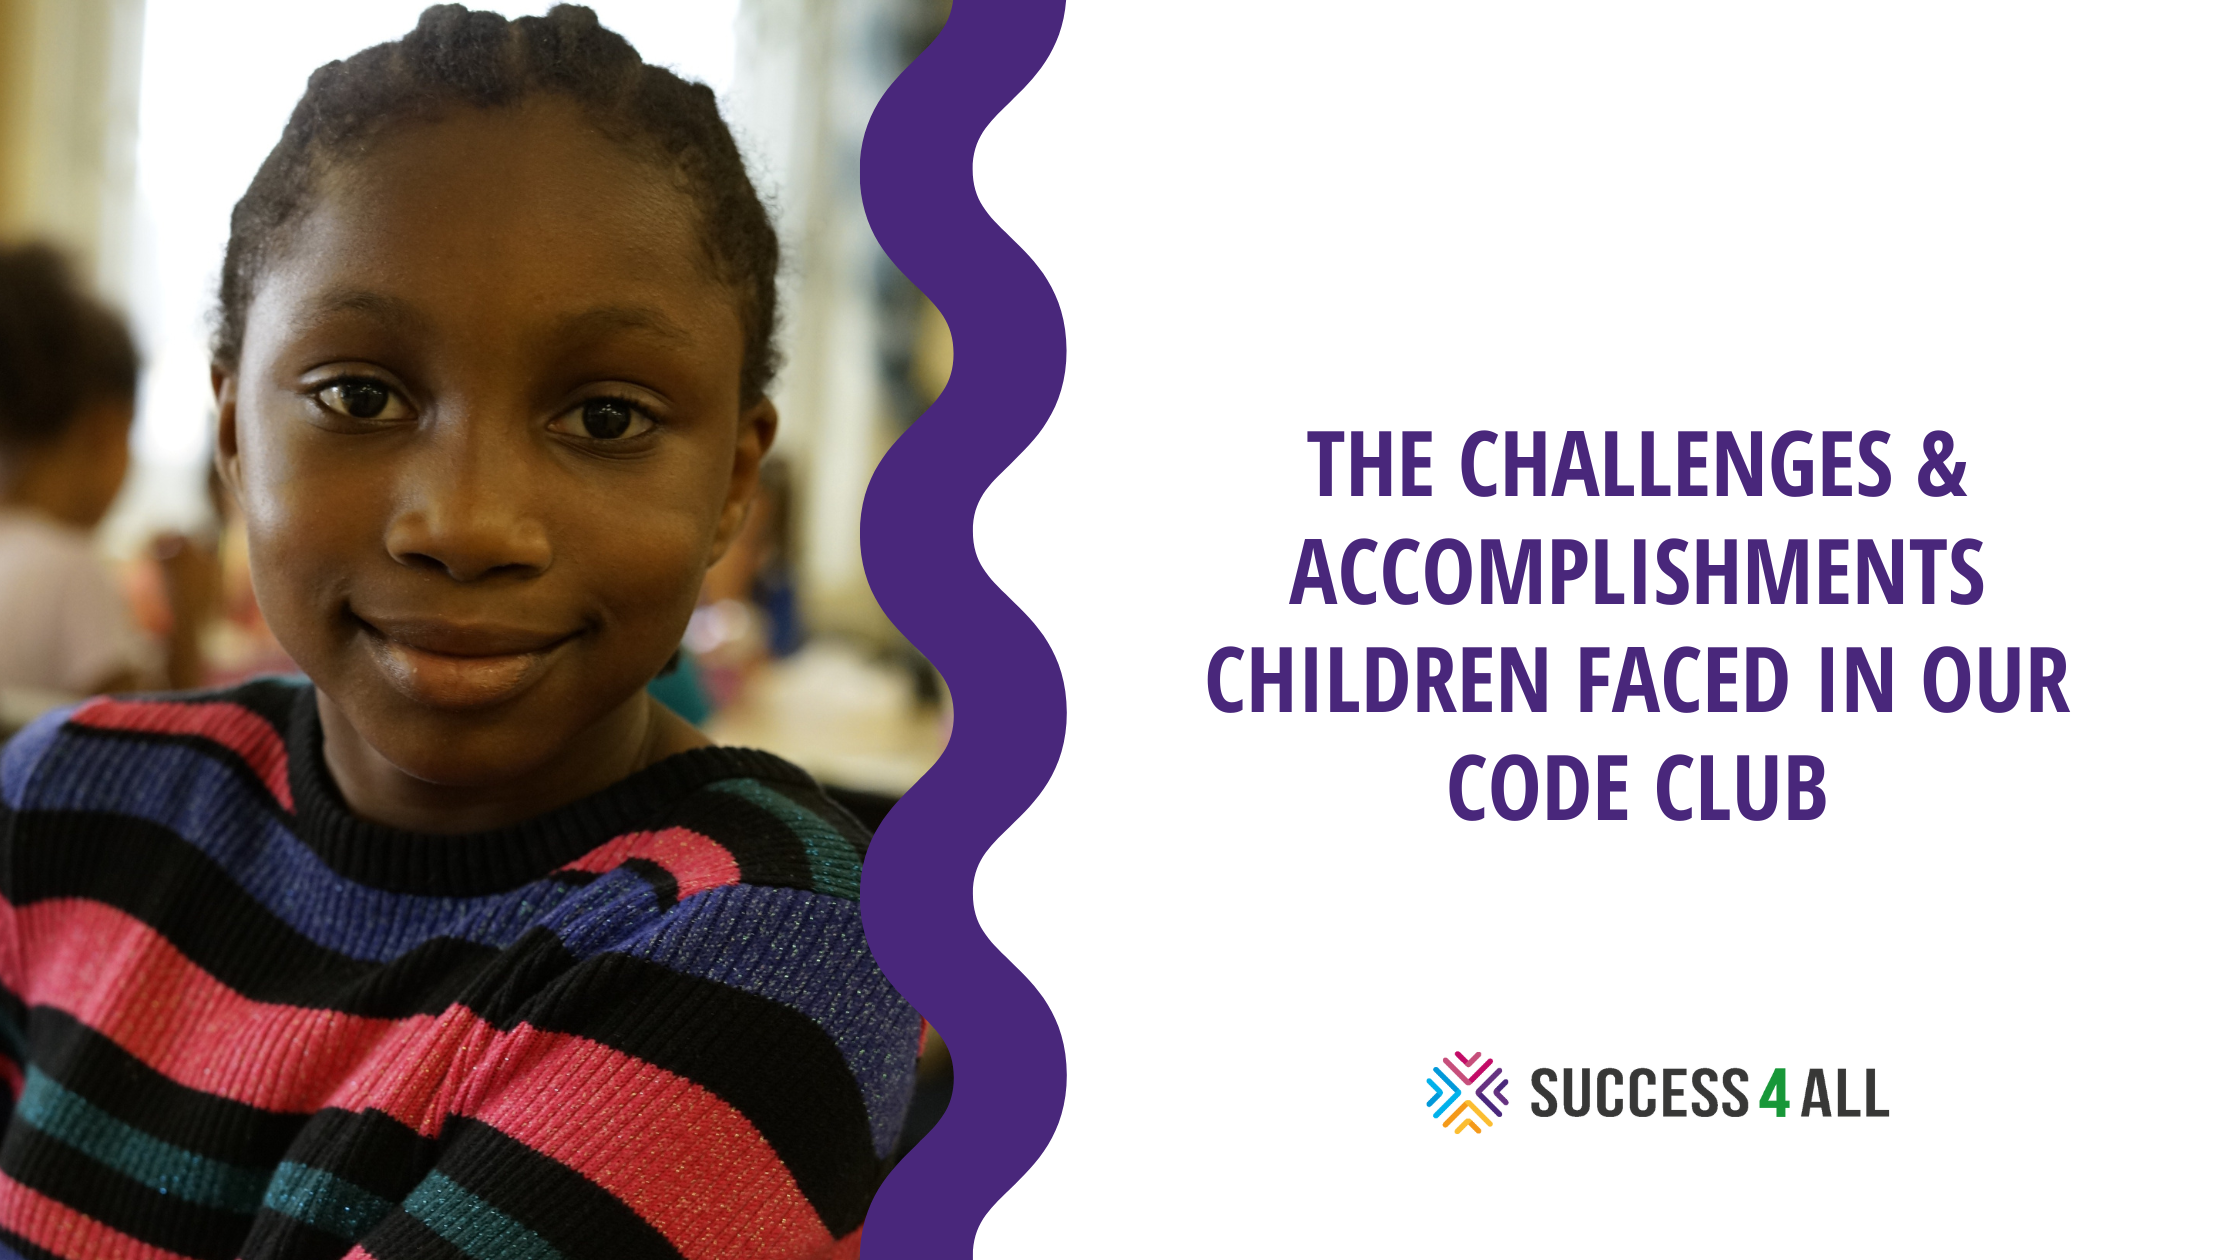 Esther wearing a stripy pink, purple and black jumper smiles. Text reads: THE CHALLENGES & ACCOMPLISHMENTS CHILDREN FACED IN OUR CODE CLUB